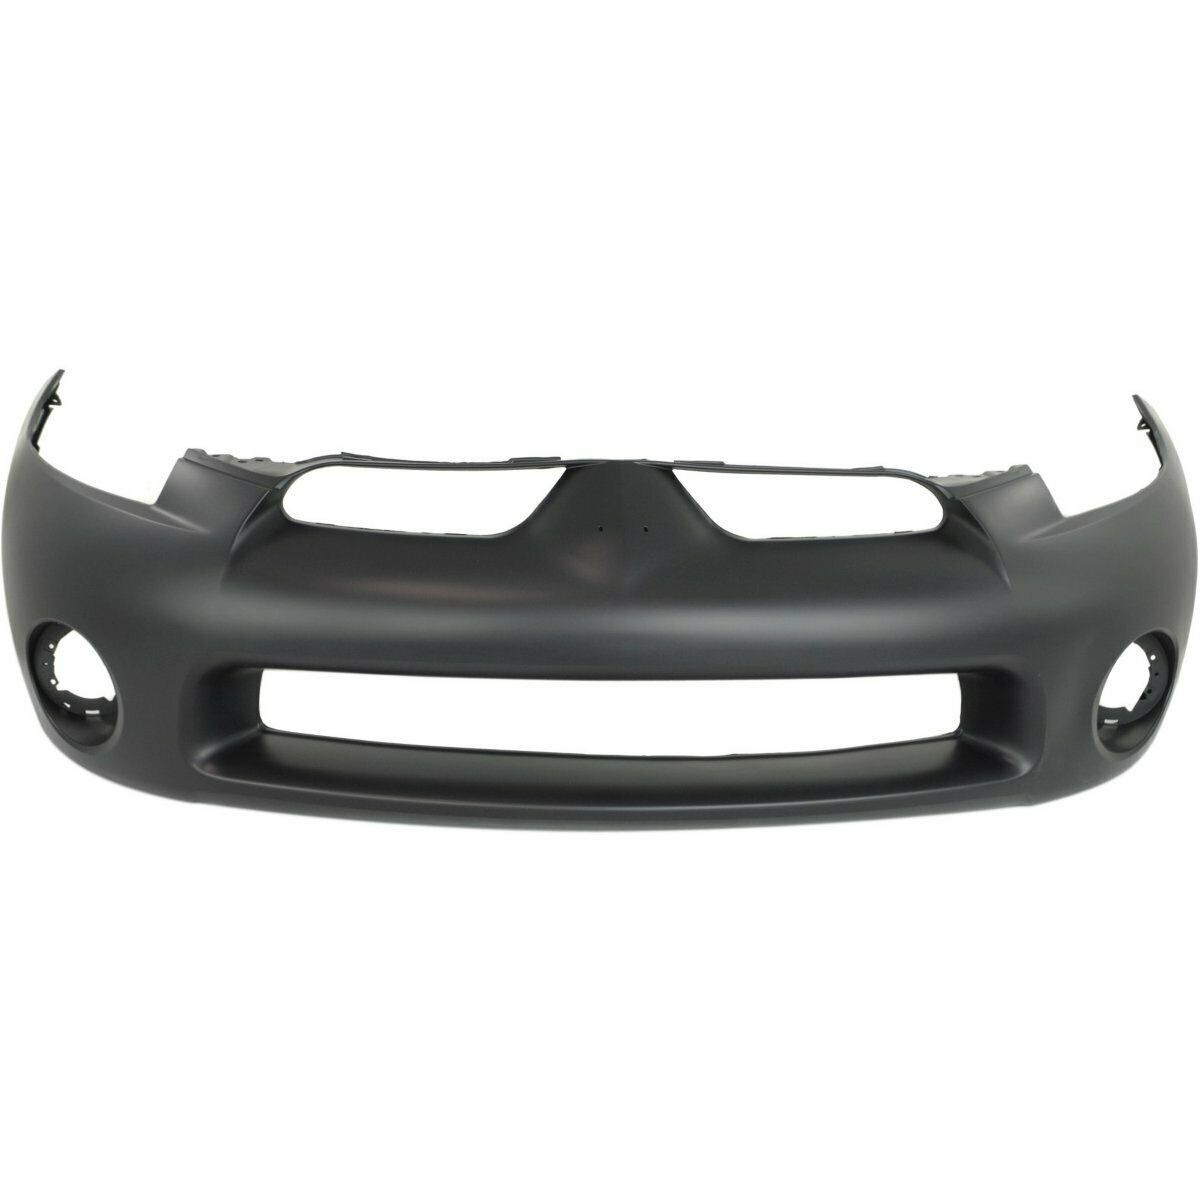 2006-2008 Mitsubishi Eclipse Front Bumper Painted to Match